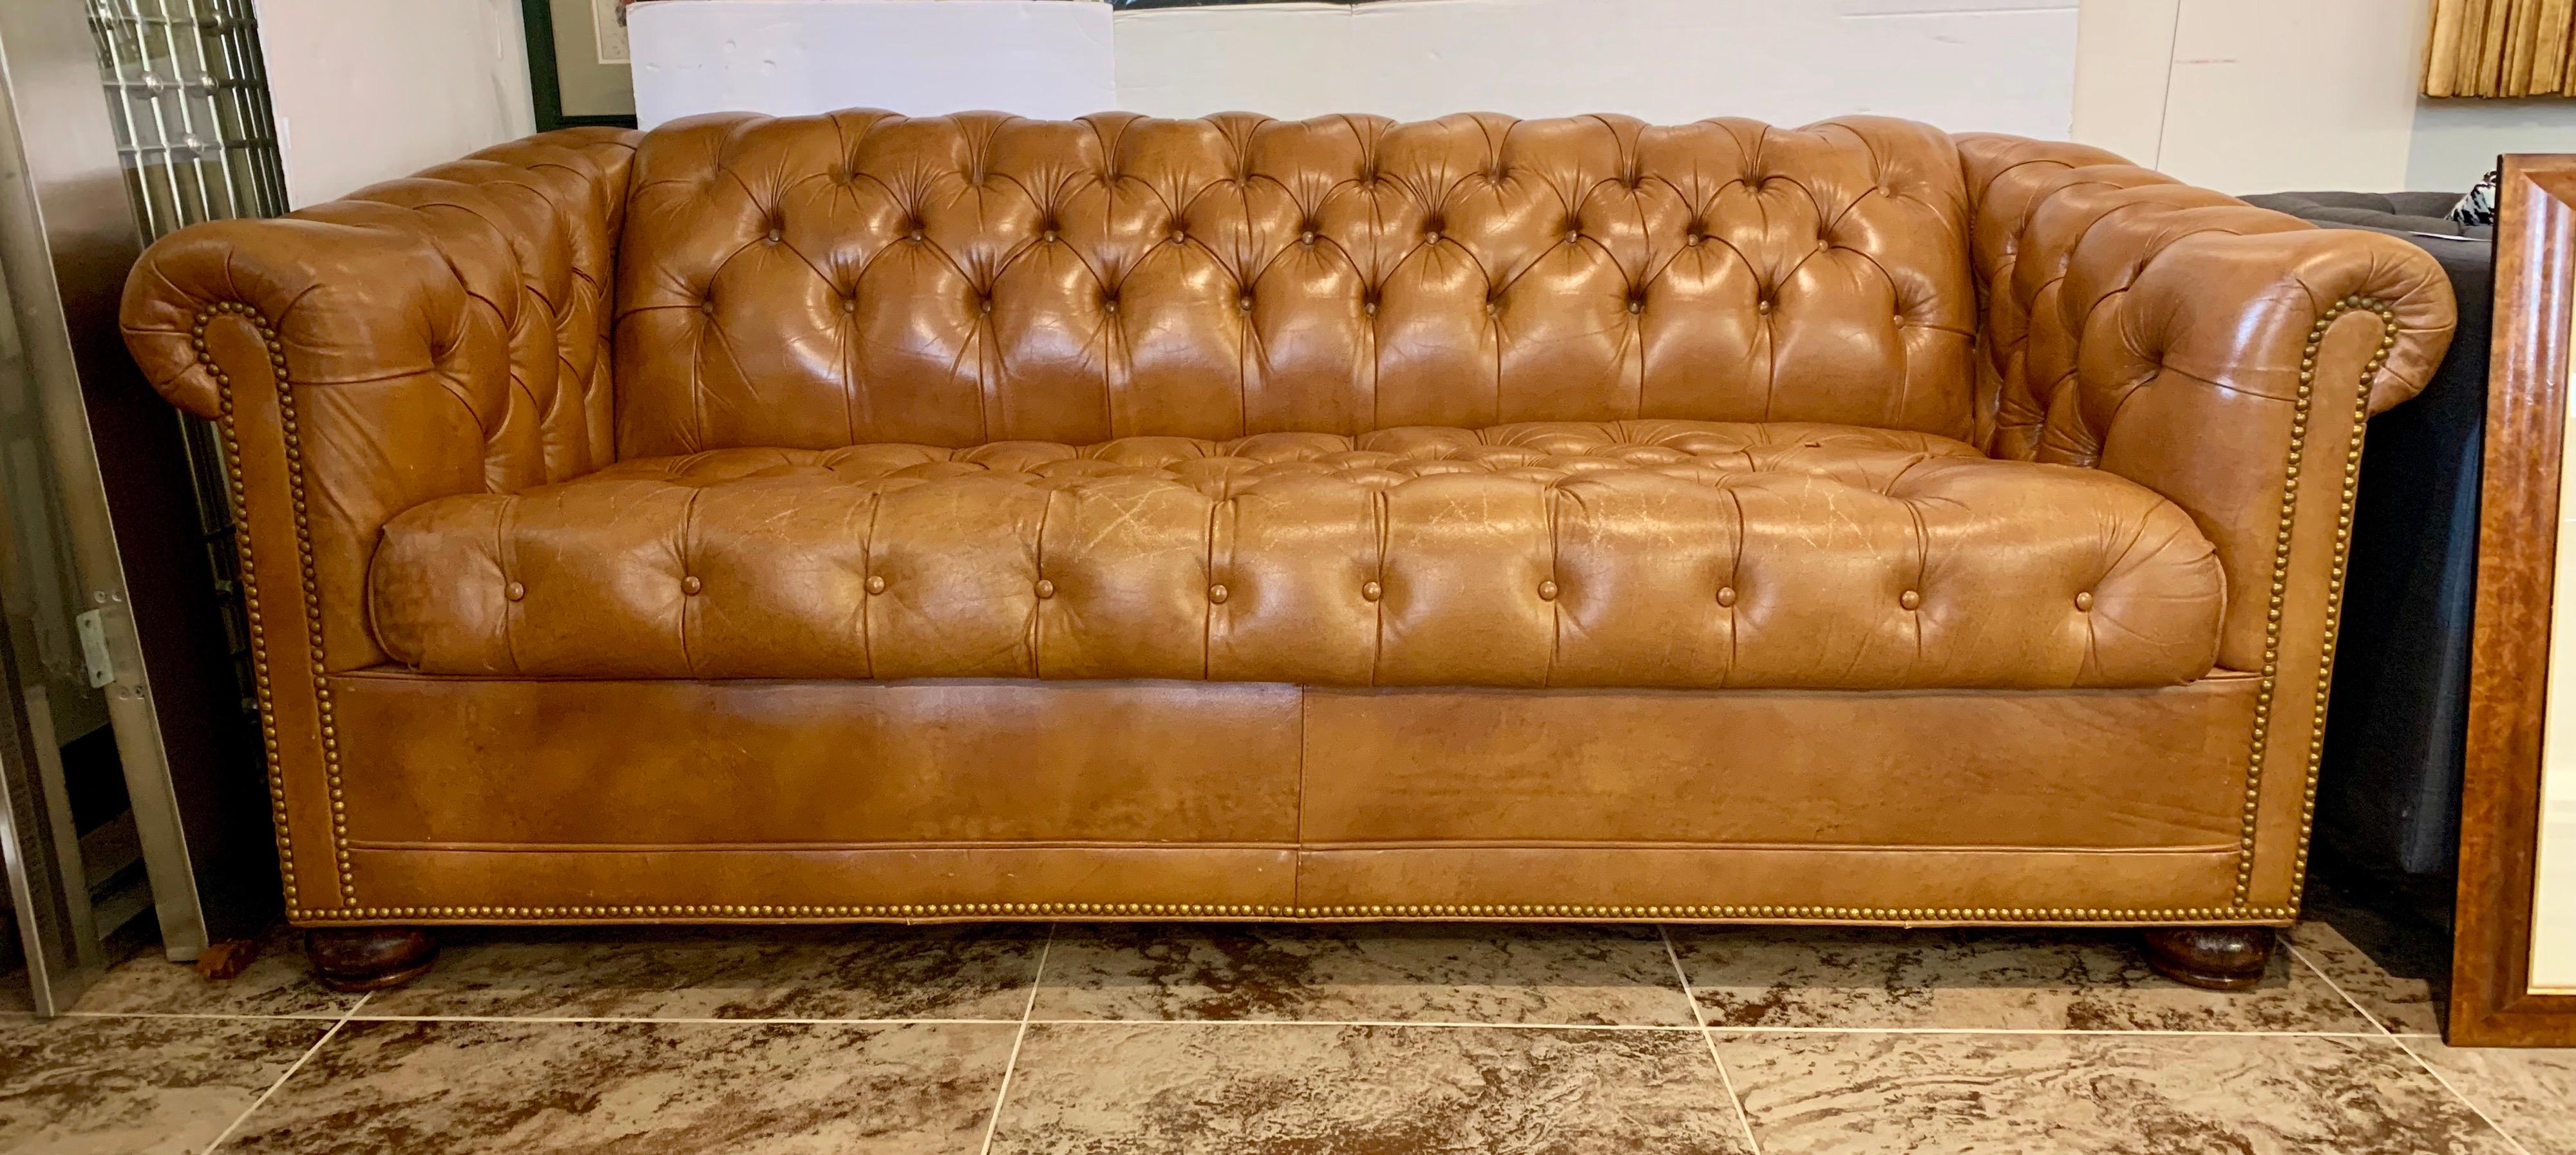 chesterfield tufted leather sleeper sofa